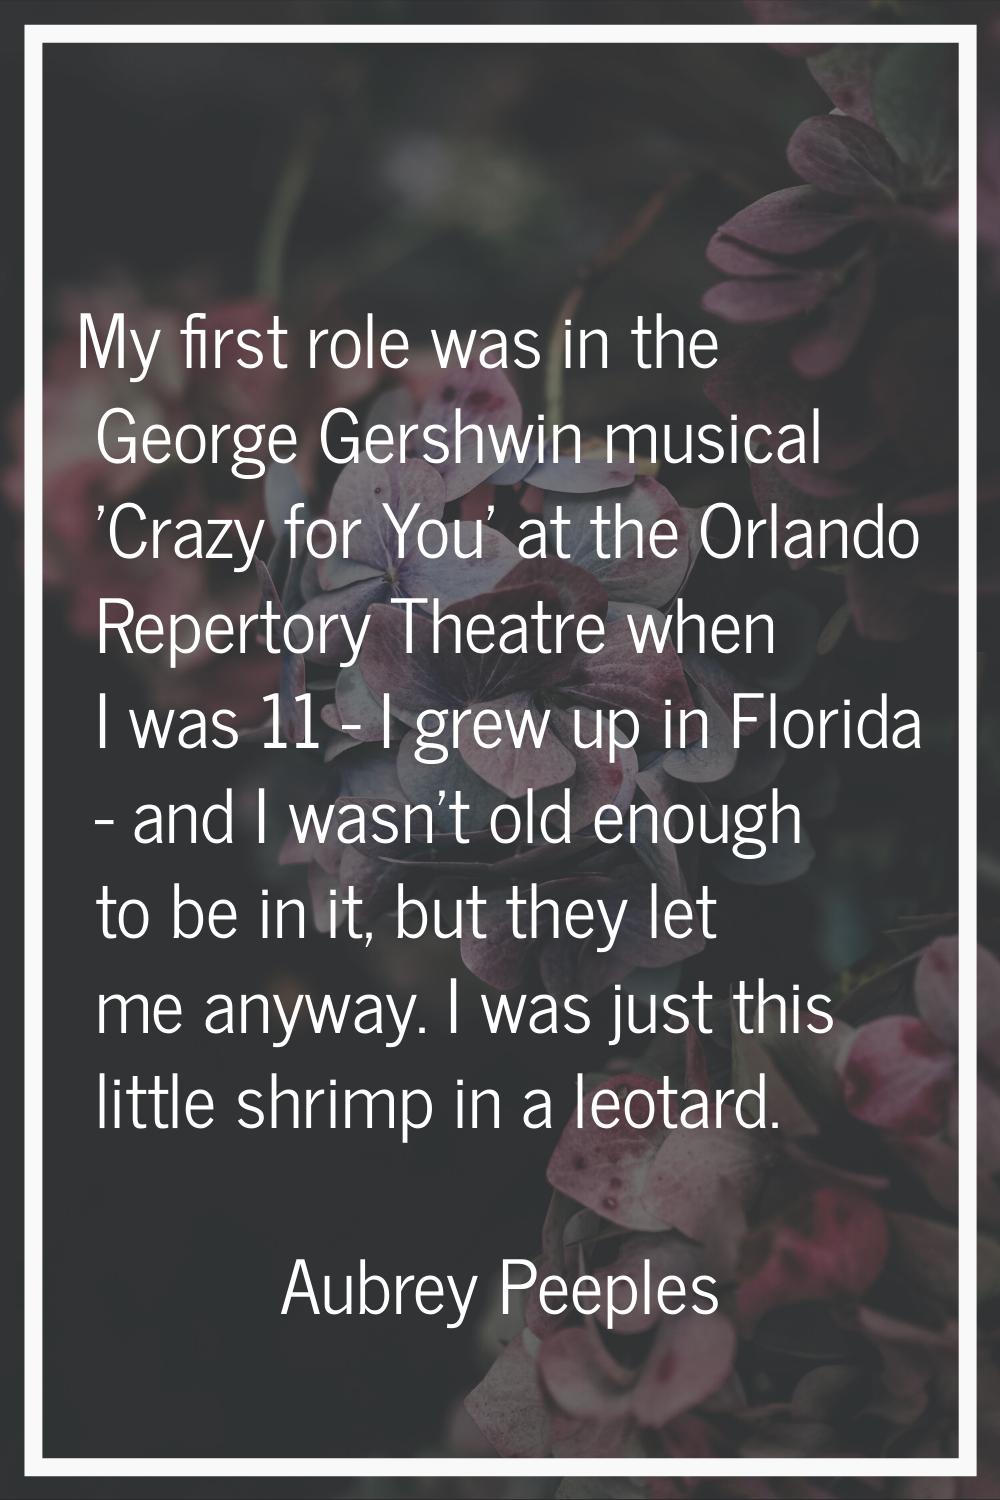 My first role was in the George Gershwin musical 'Crazy for You' at the Orlando Repertory Theatre w